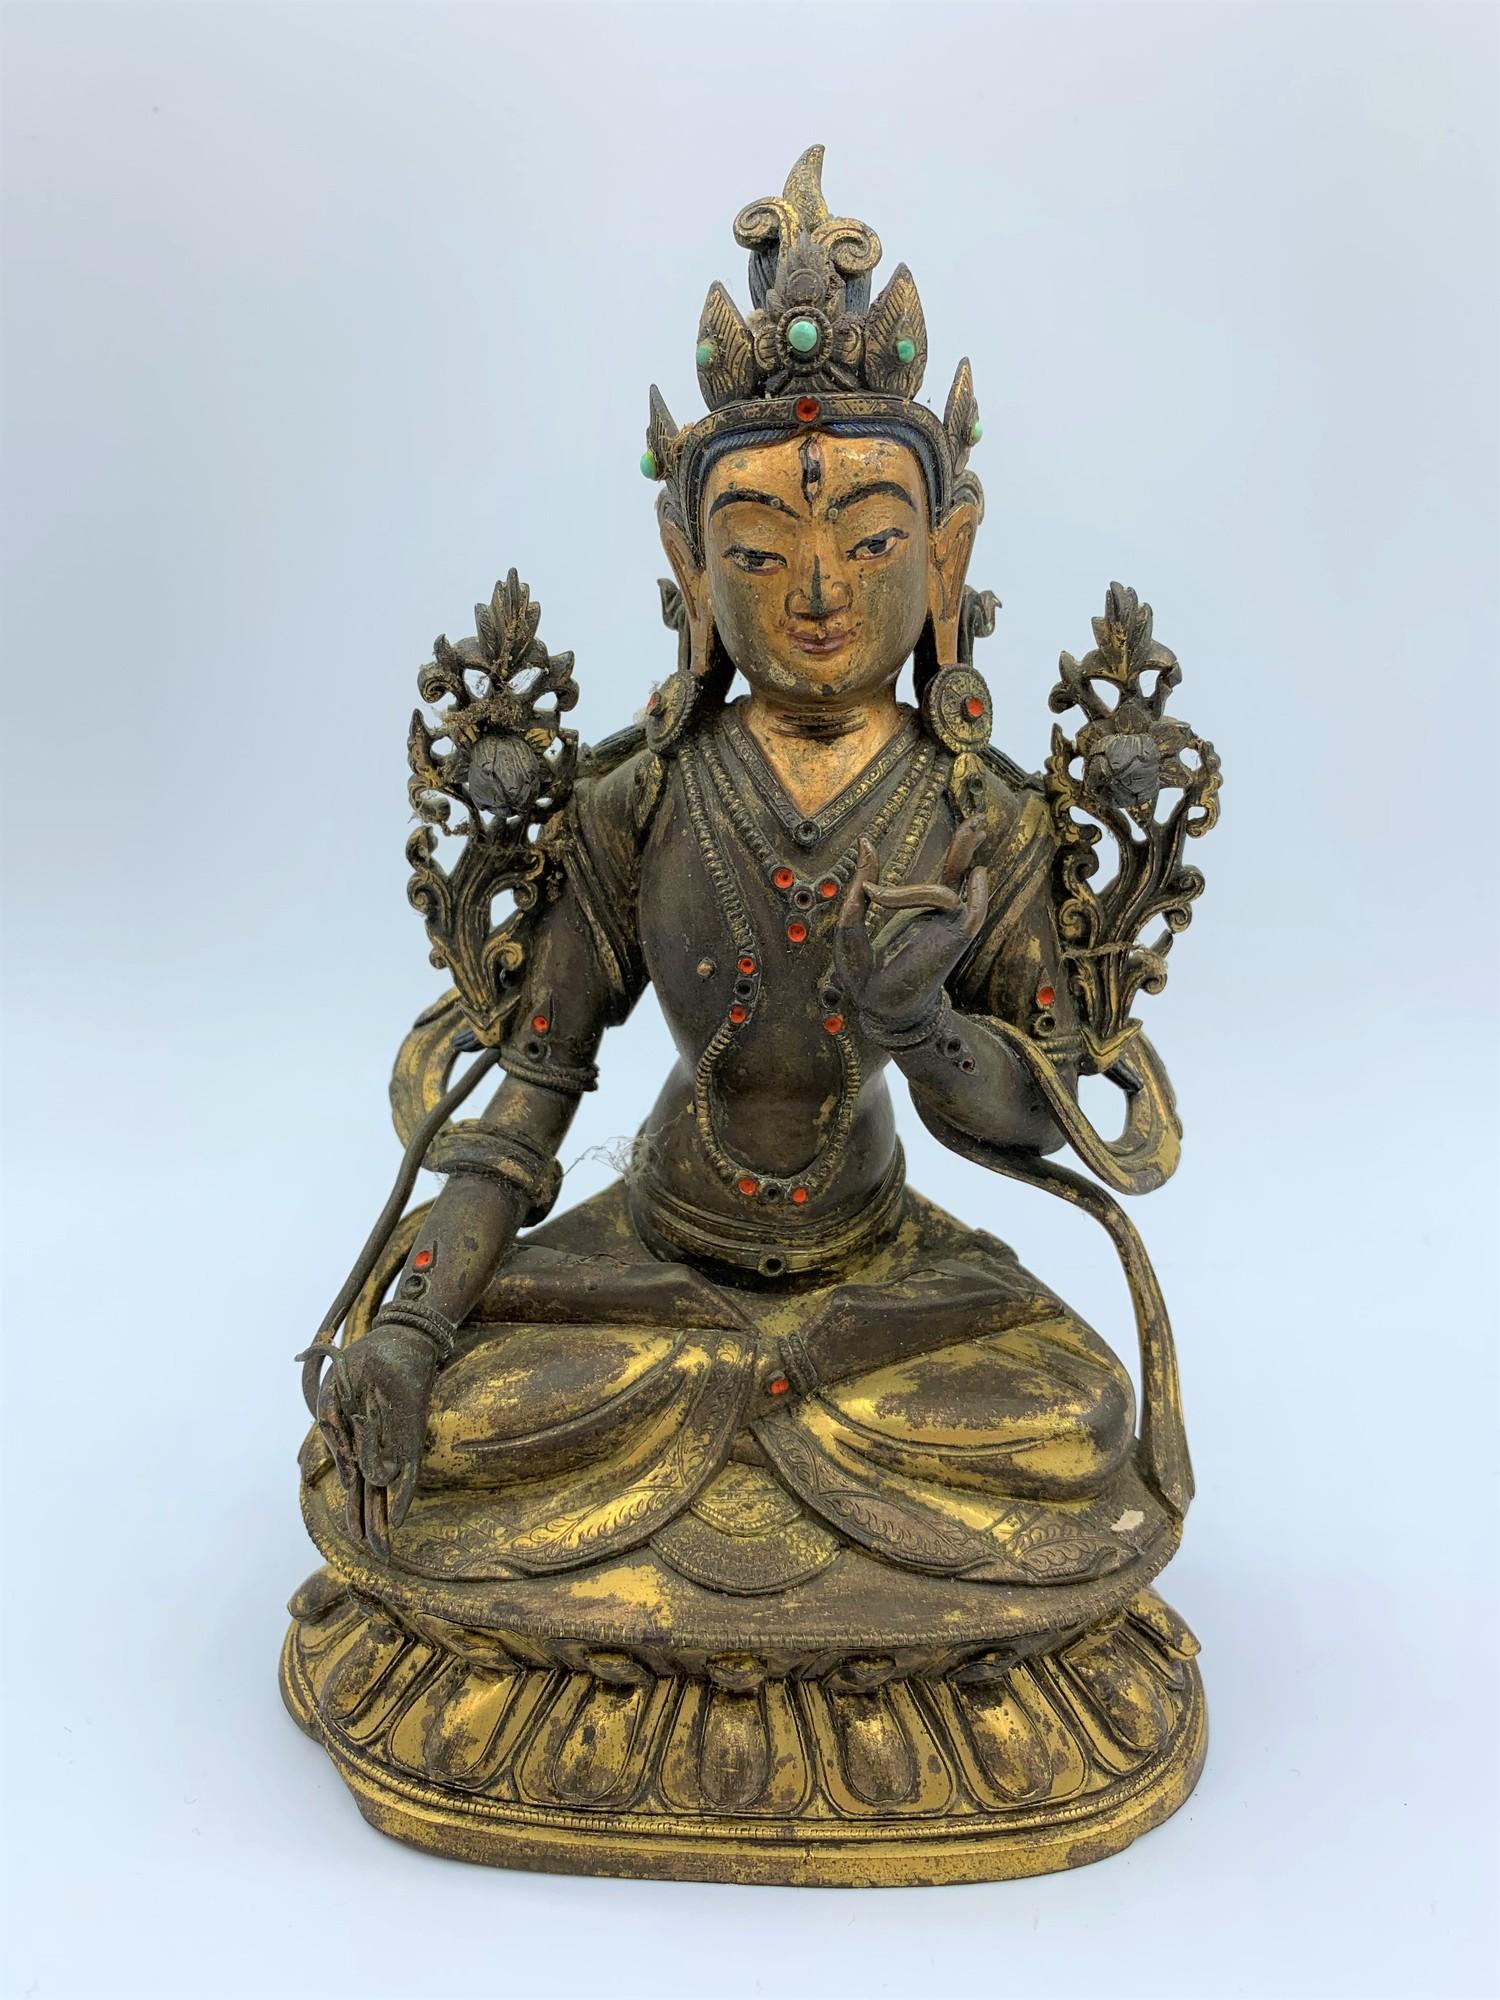 A very early Tibetan religious deity gilt on bronze with turquoise stones and painted dace, weight